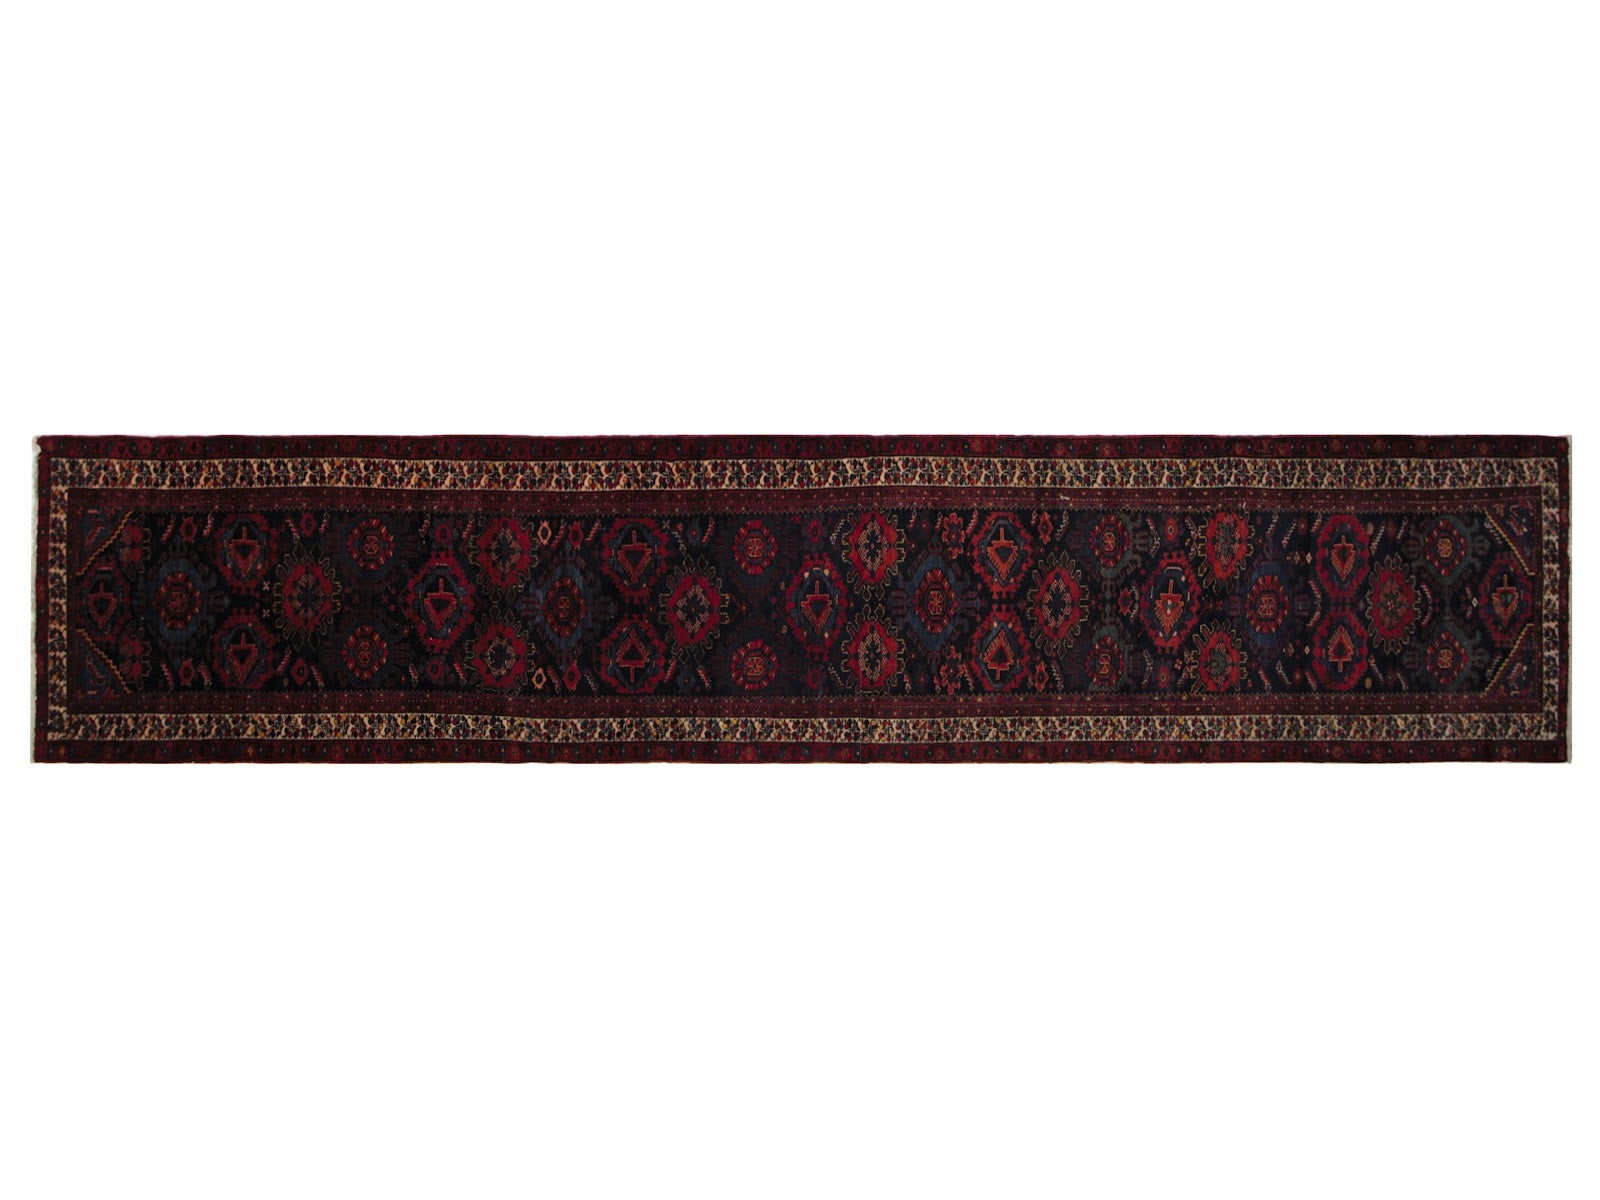 3x17 hand-knotted vintage Persian runner featuring traditional floral patterns in dark navy blues with red accents